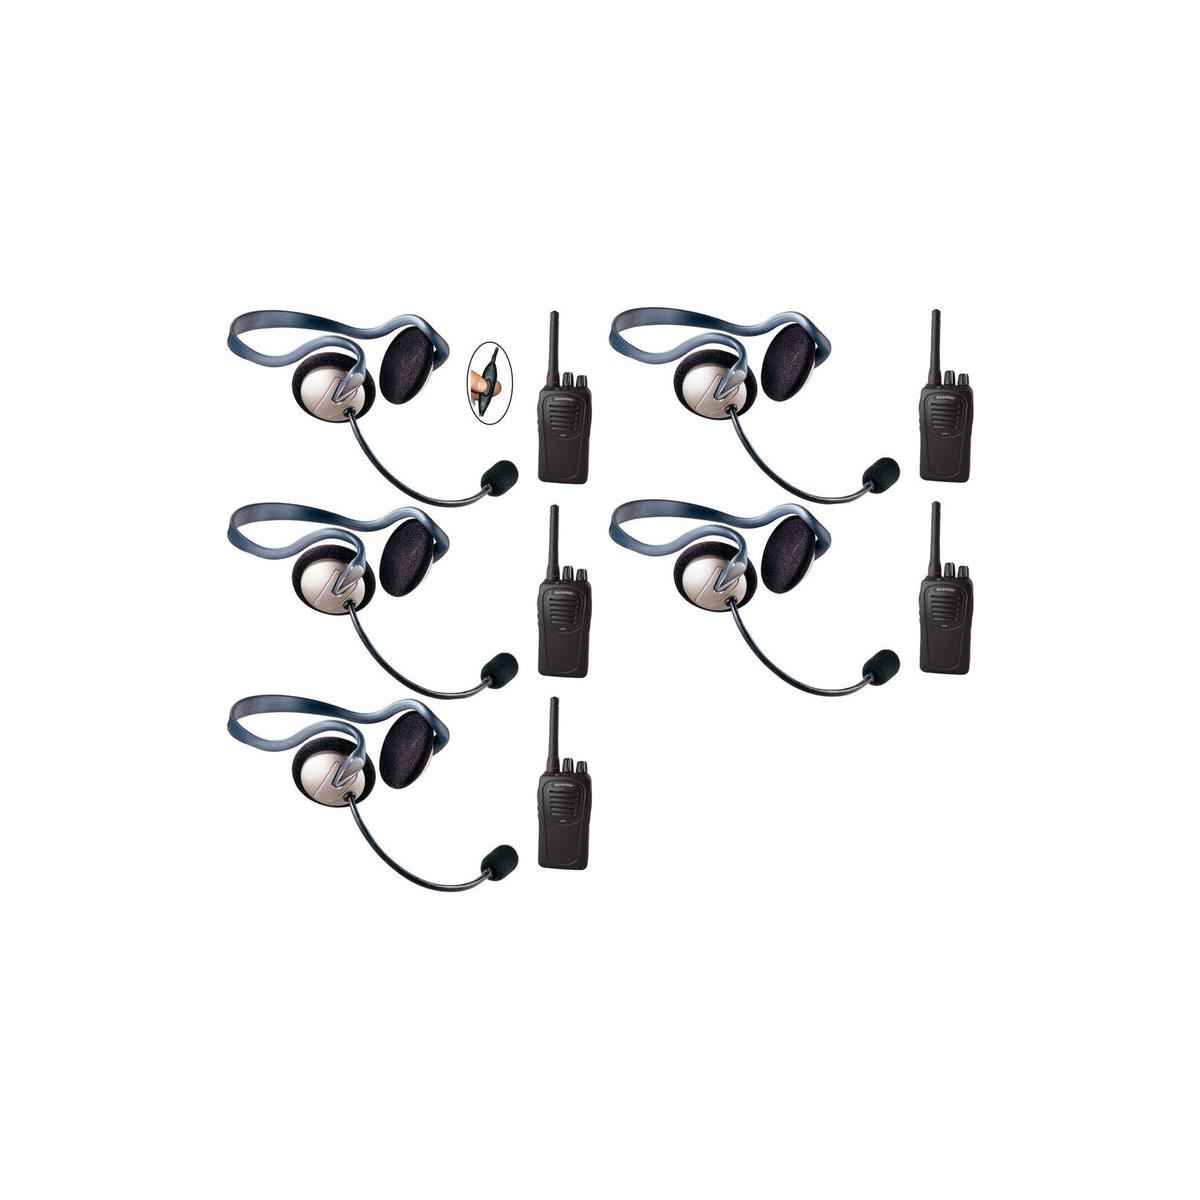 Image of Eartec SC-1000 5-User Two-Way Radio System with 5x Monarch Inline PTT Headsets